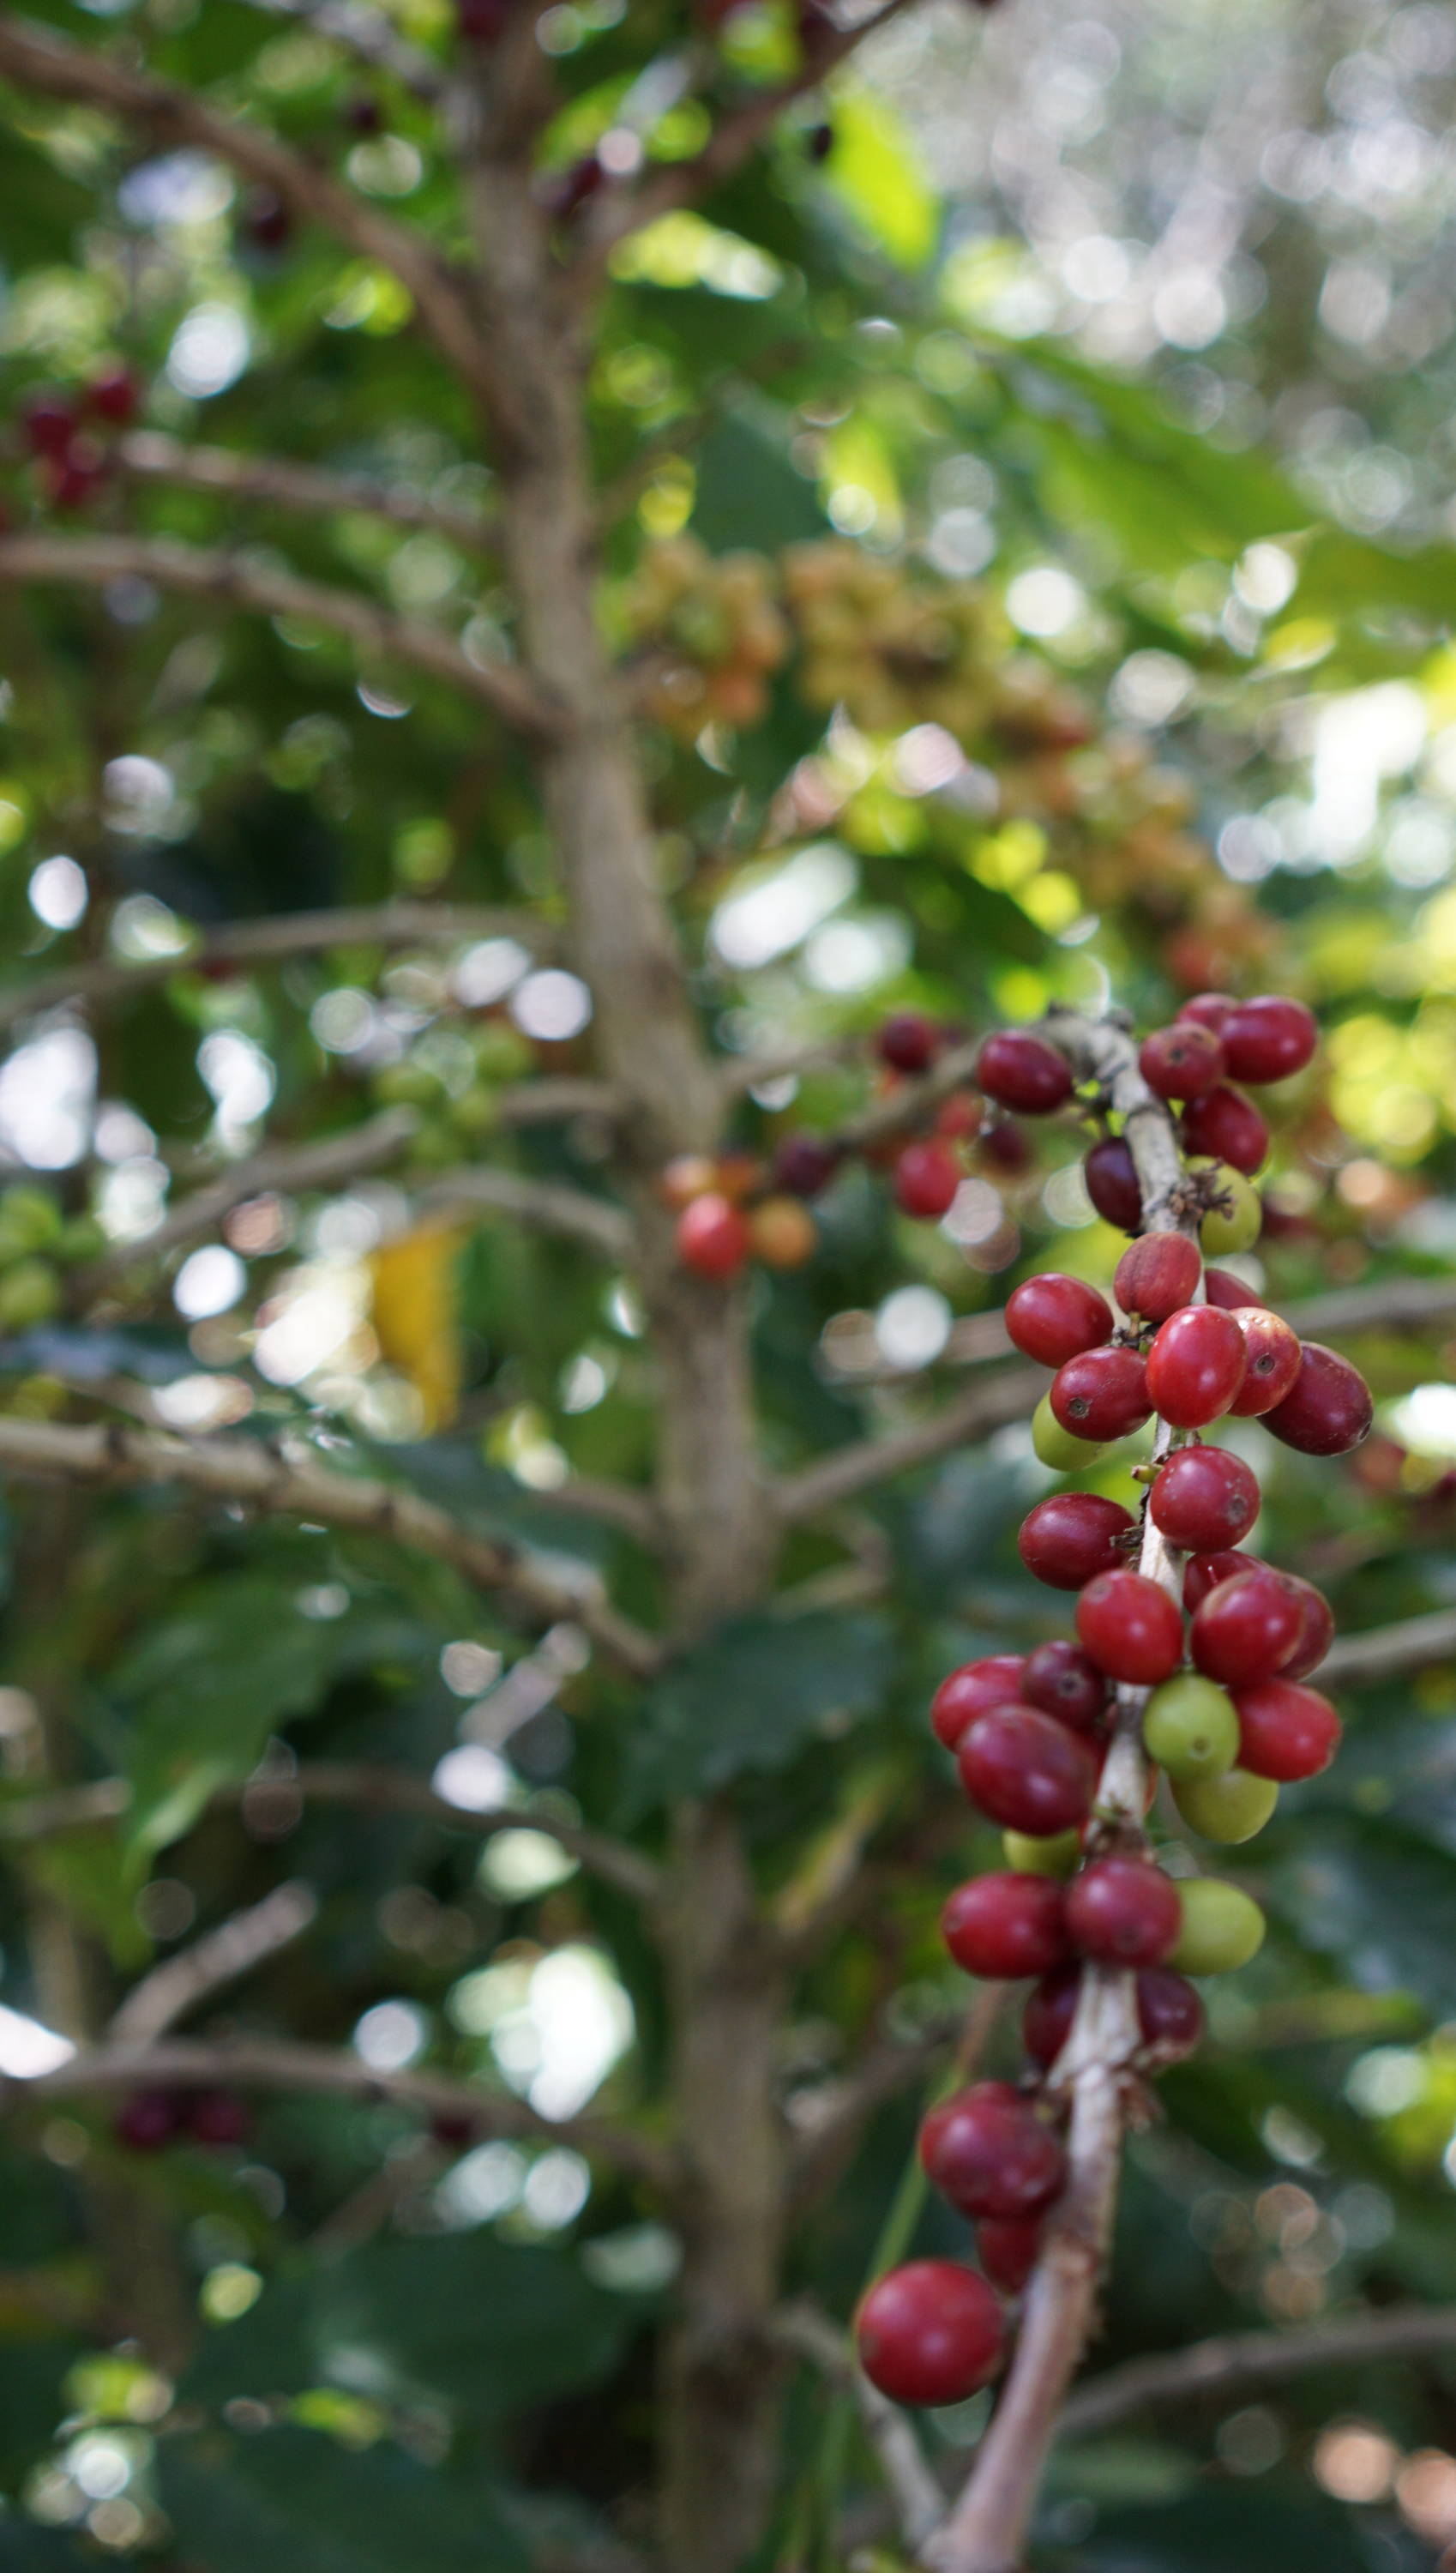 Ripe, red coffee cherries, ready for harvest in Tierra y Libertad